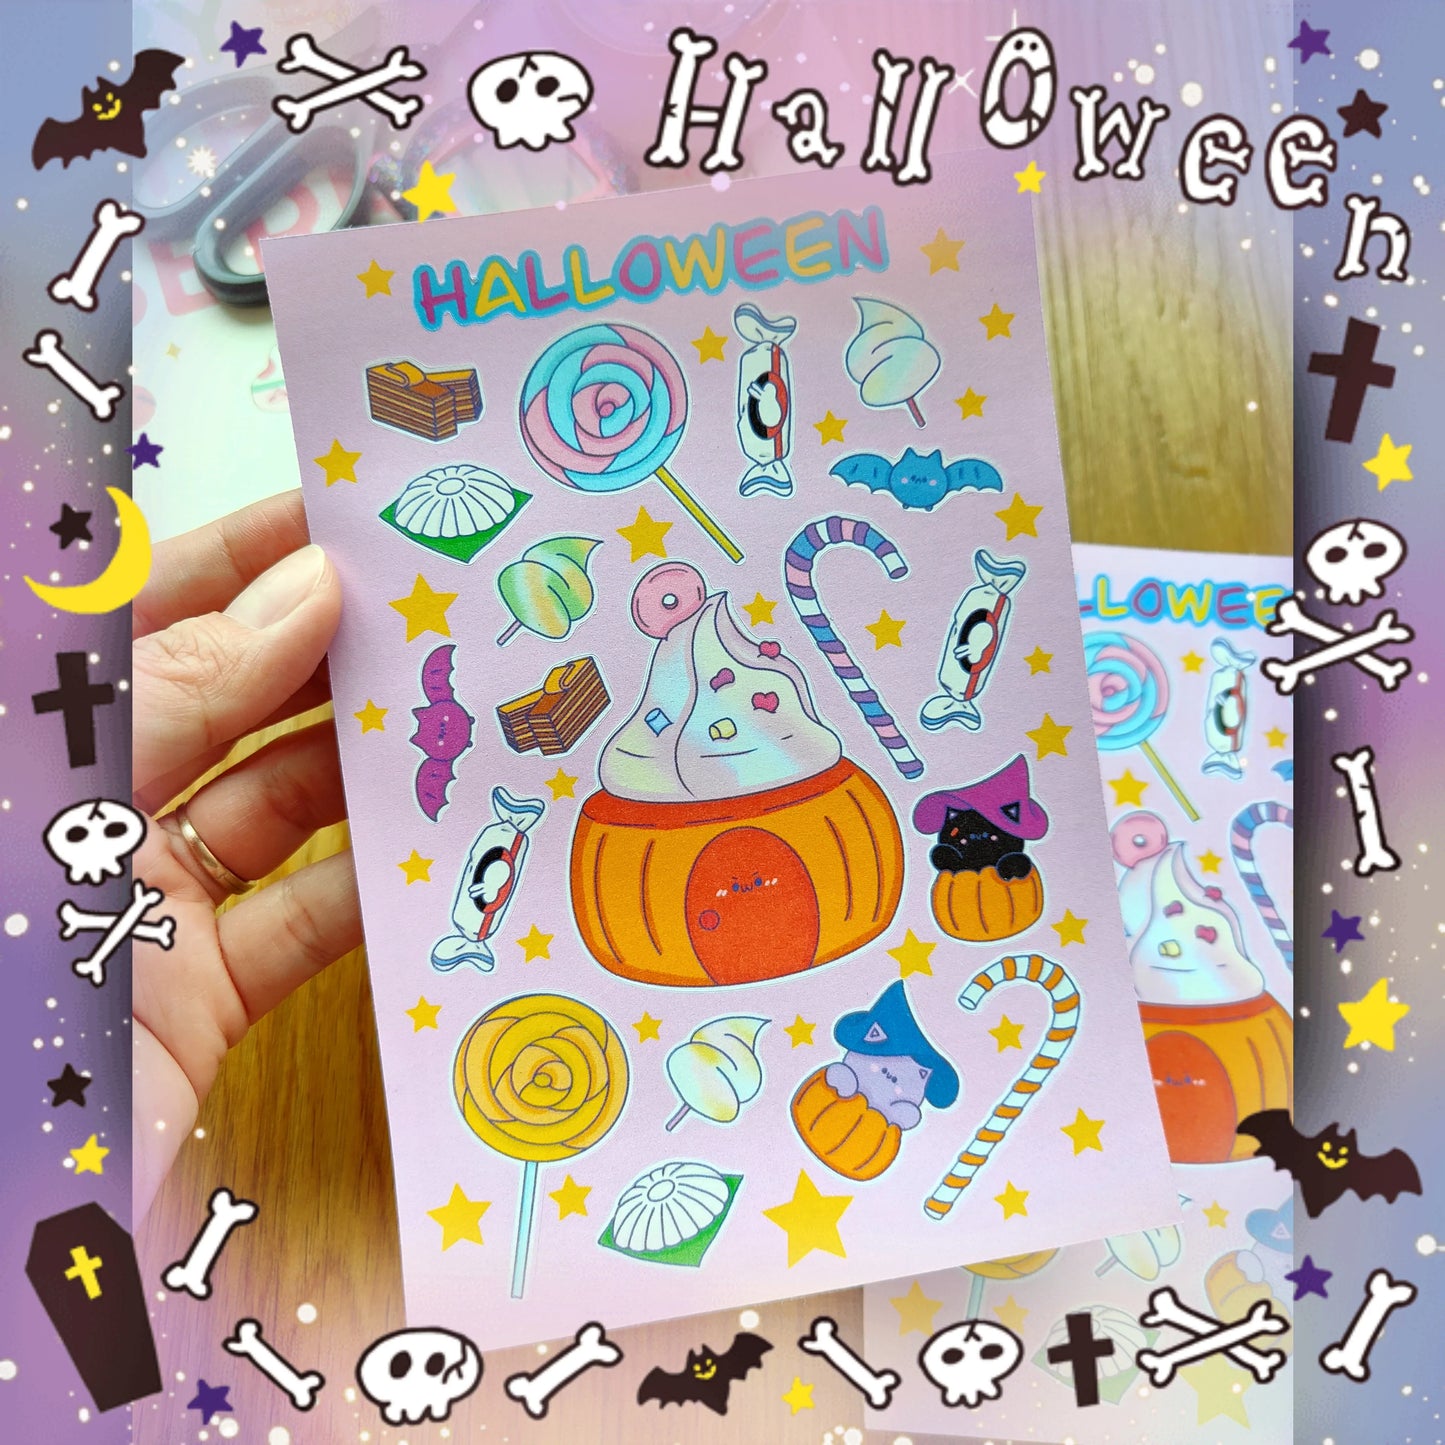 Halloween Candy Stickers Fuzzy N Chic